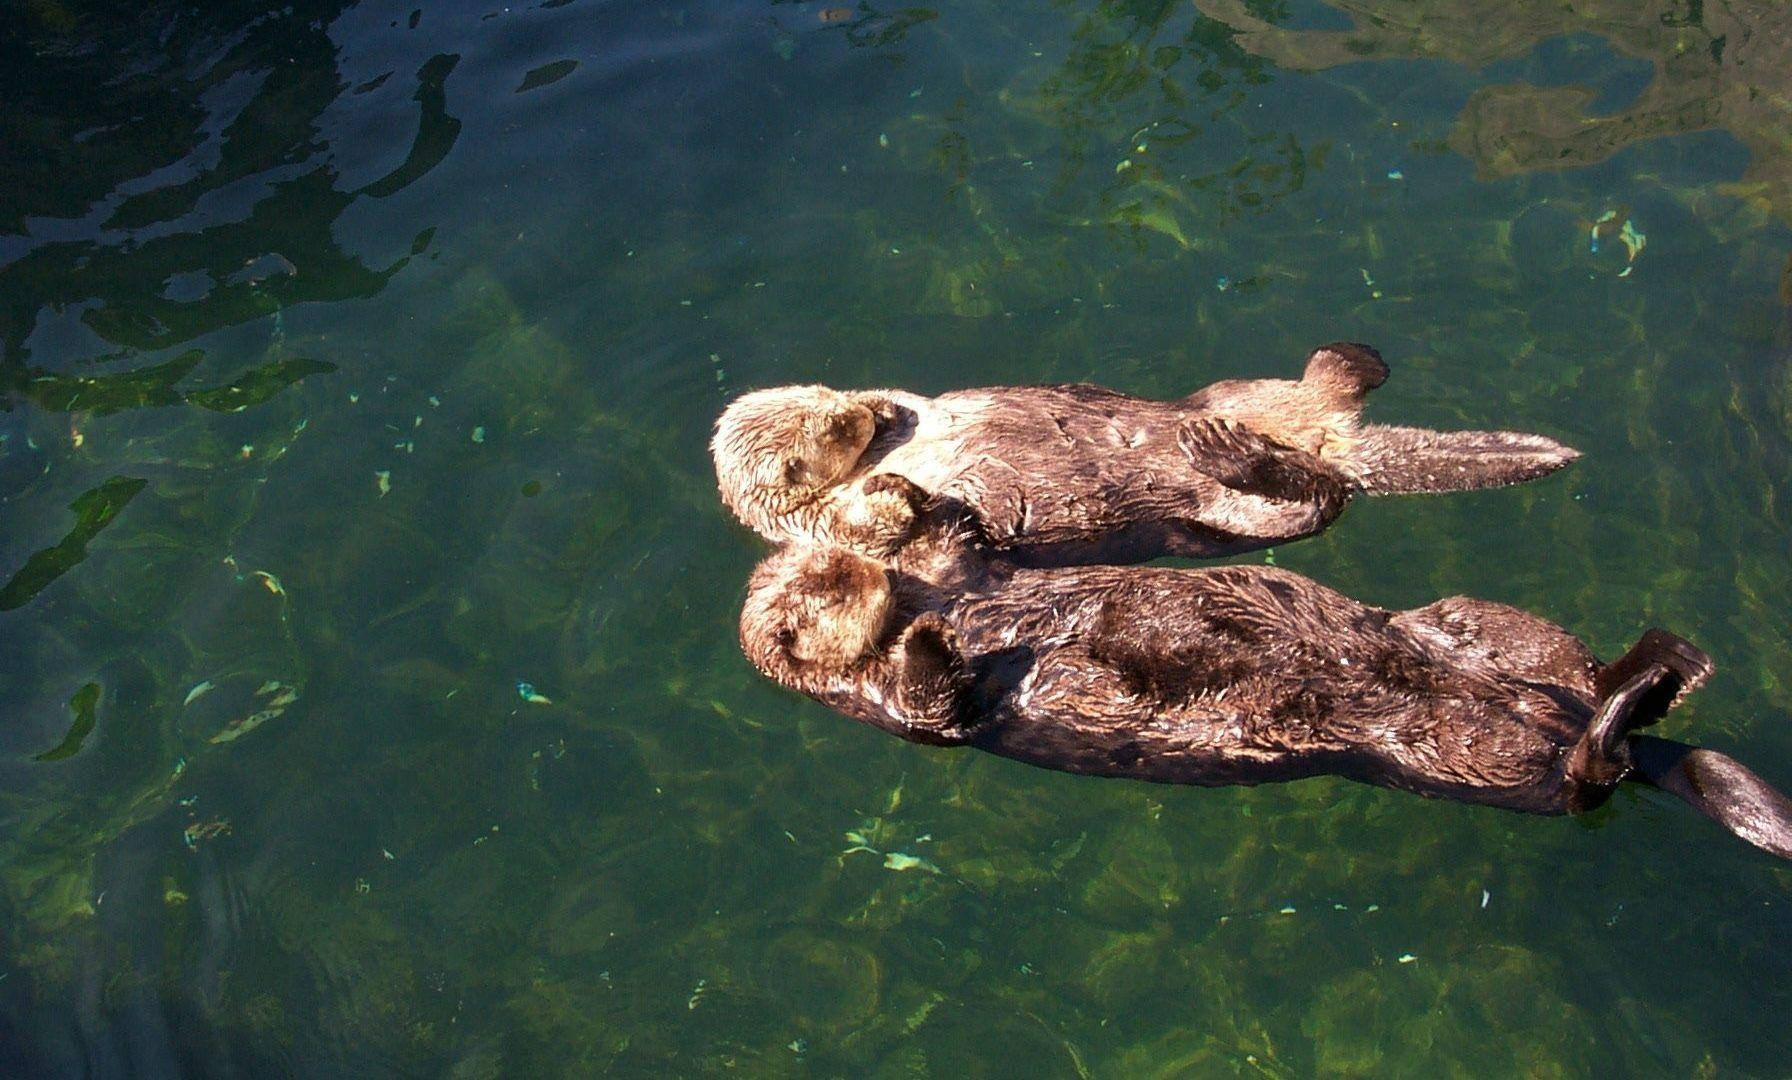 Two Adorable Otters Floating Together In The Water Background